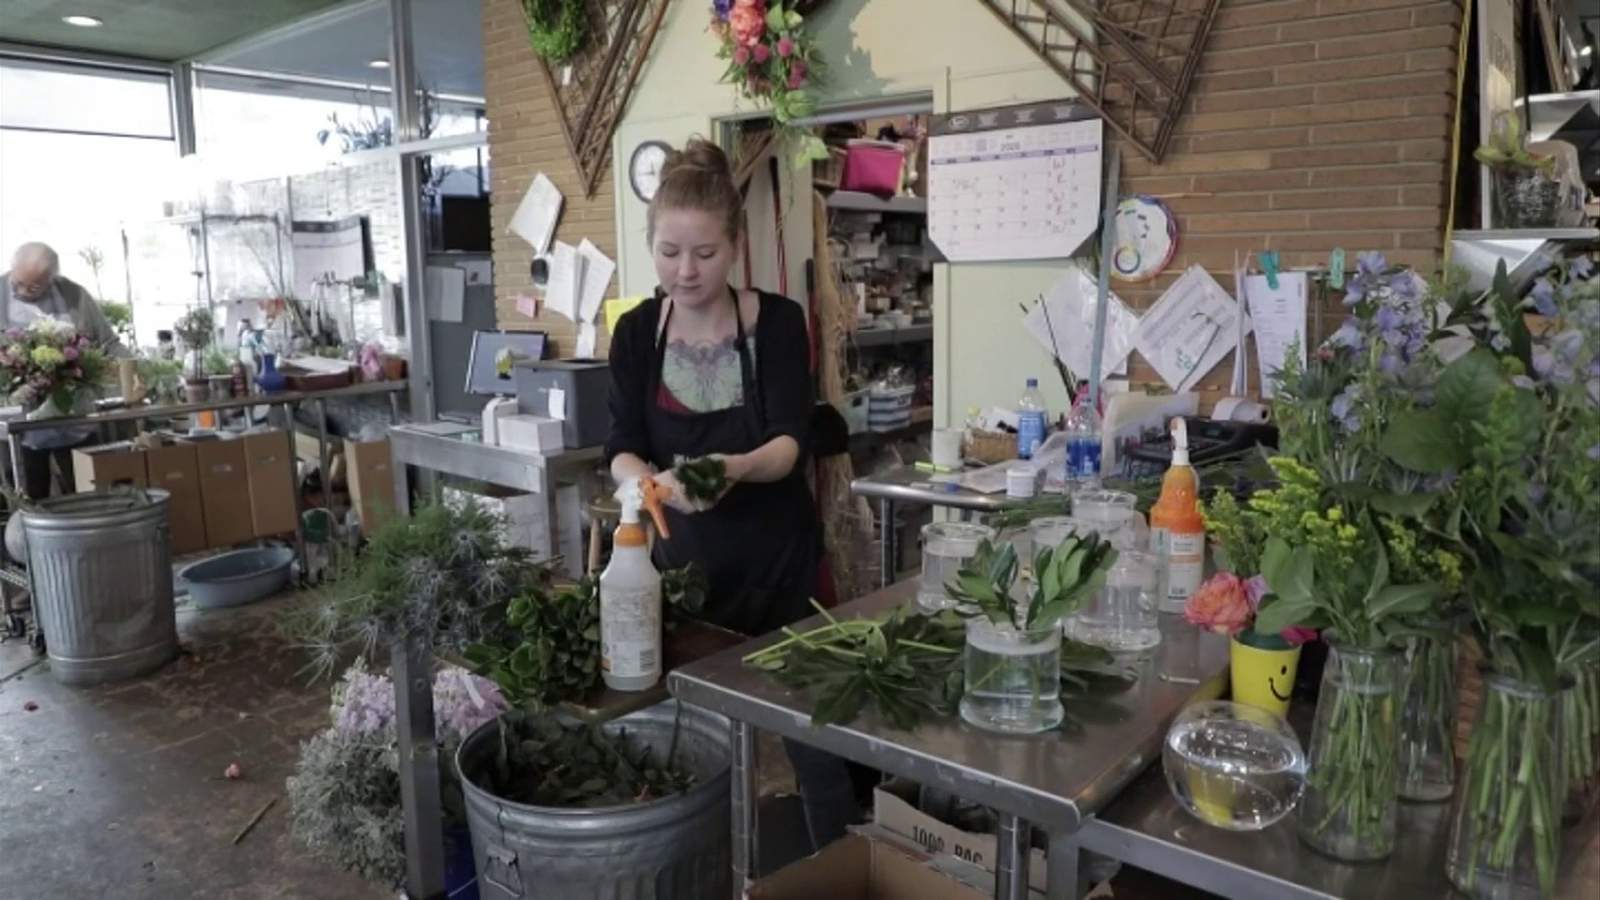 Local flower deliveries soar over Mother’s Day weekend